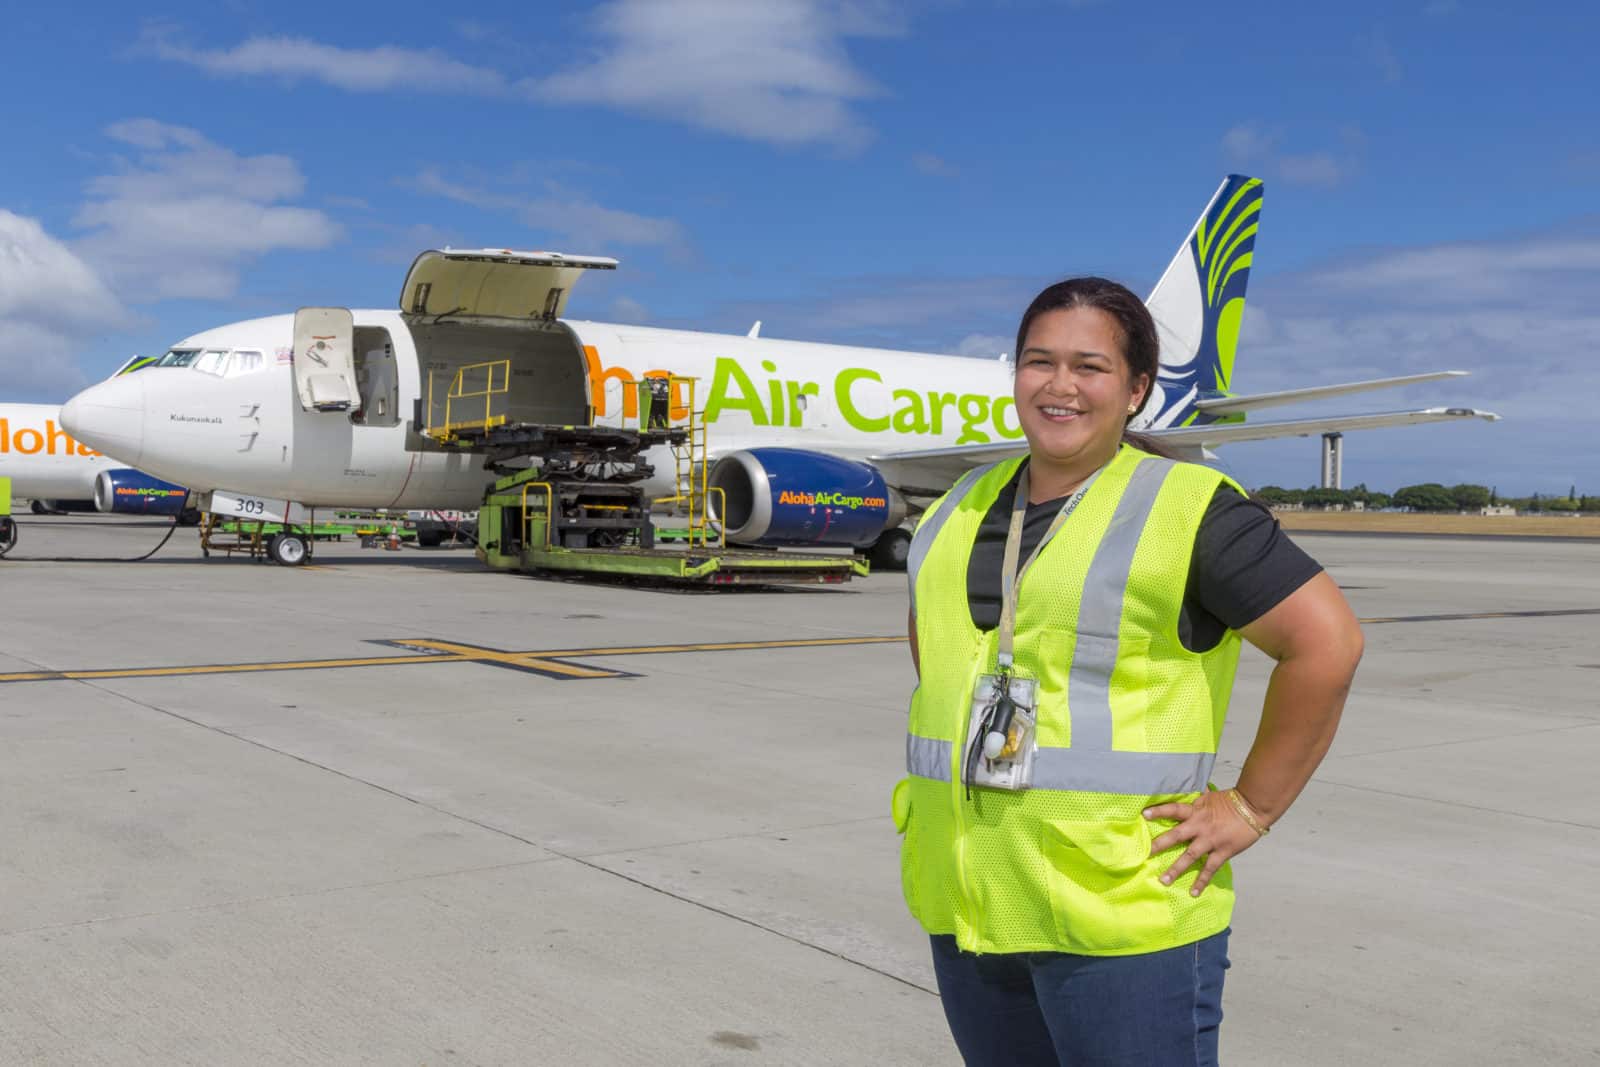 Medeiros stands in a yellow reflective vest, an Aloha Air Cargo plane with bay doors open sits on the tarmac behind her.